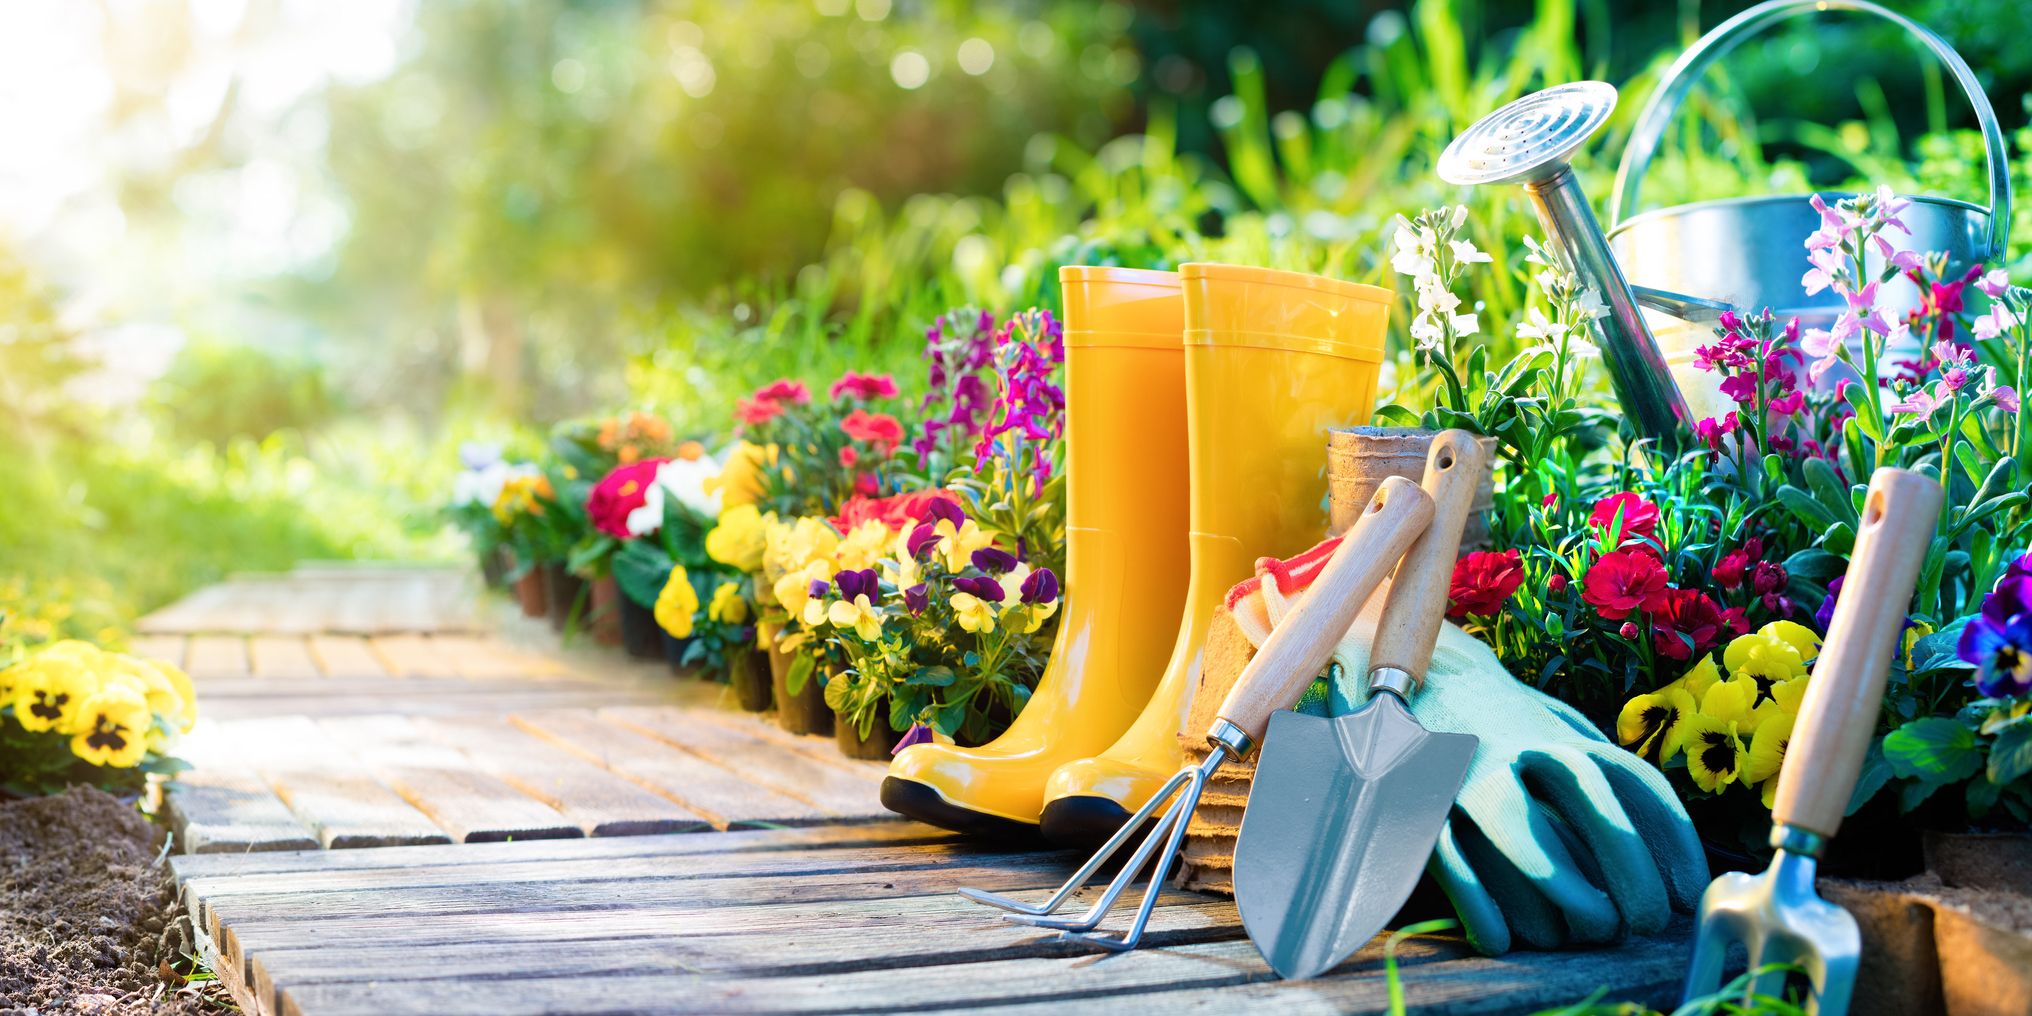 How to Maintain Your Garden